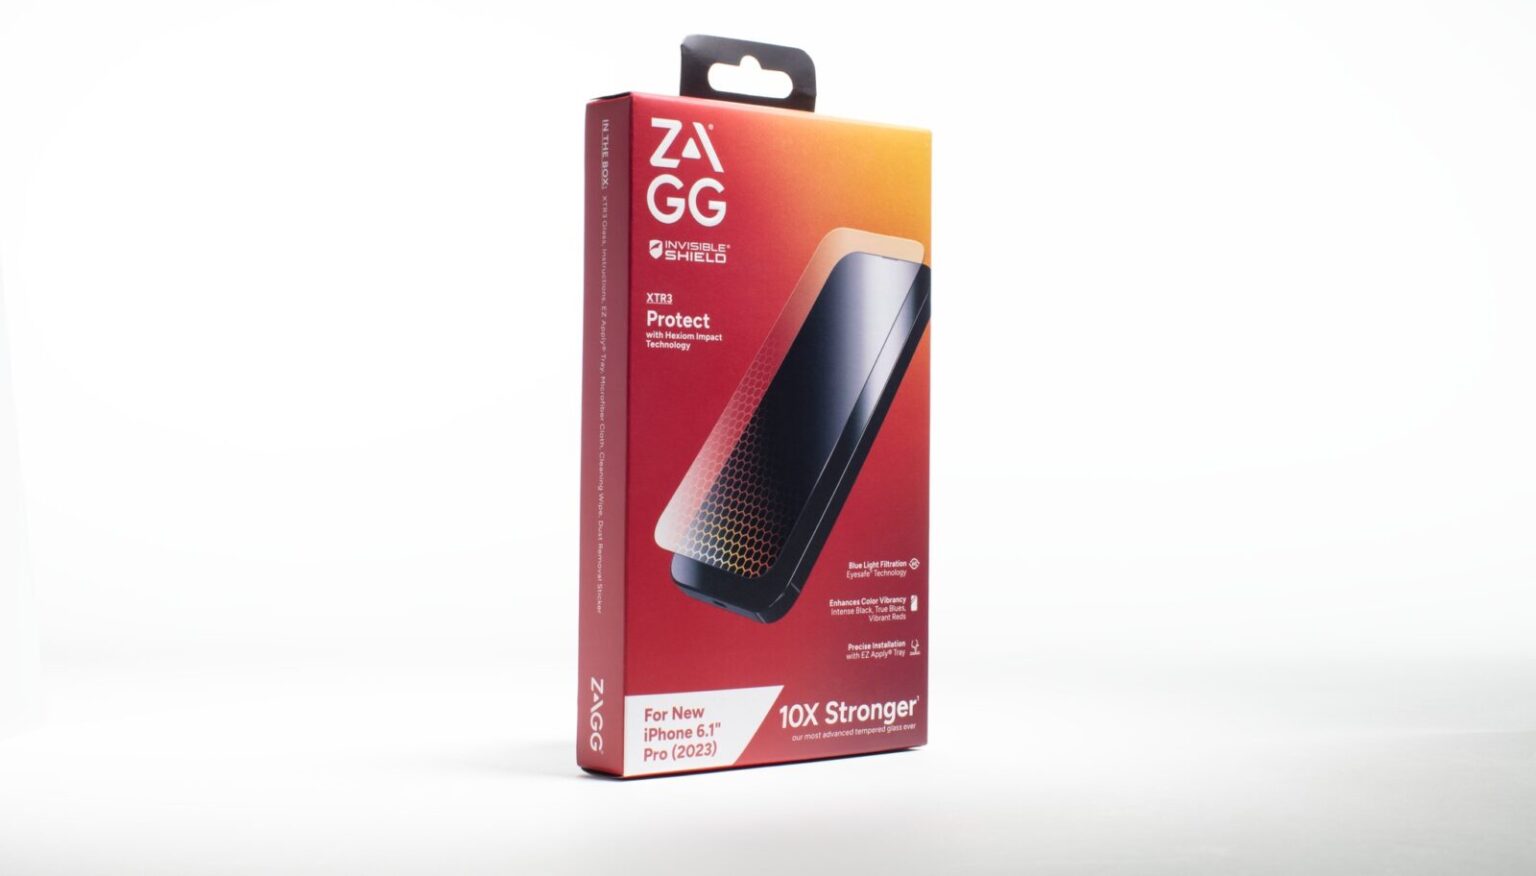 Zagg XTR3 screen protector box. Edge to edge protection protecting your screen from any accidental drops.